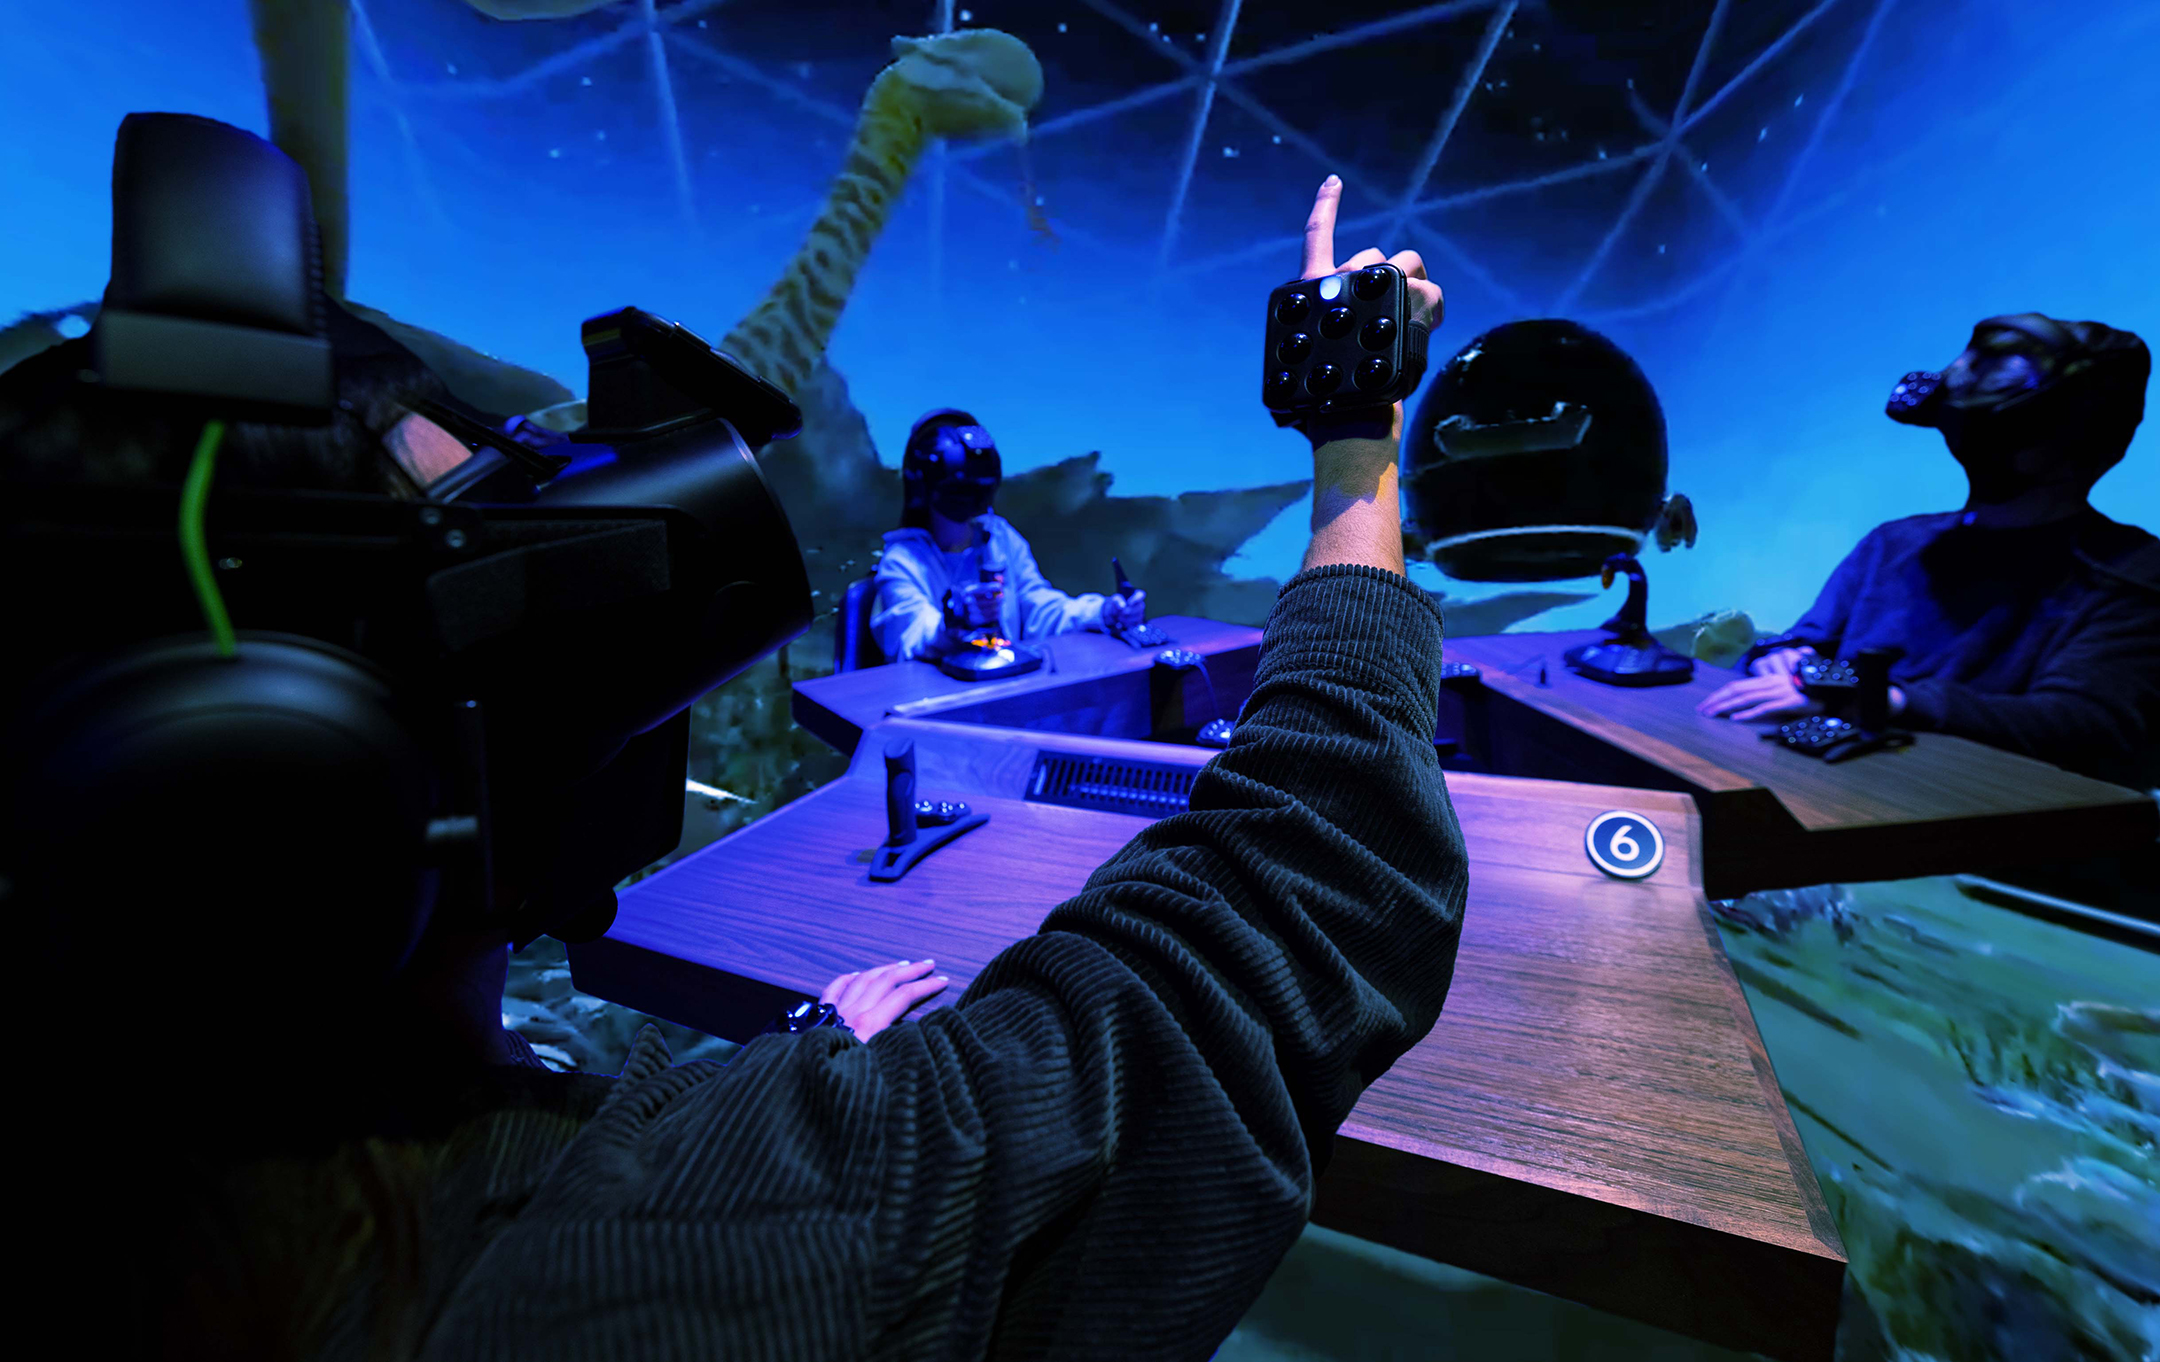 Rendering of three college students, all seated at desks and wearing virtual reality headsets, interacting with a virtual world of dinosaurs and space scenes